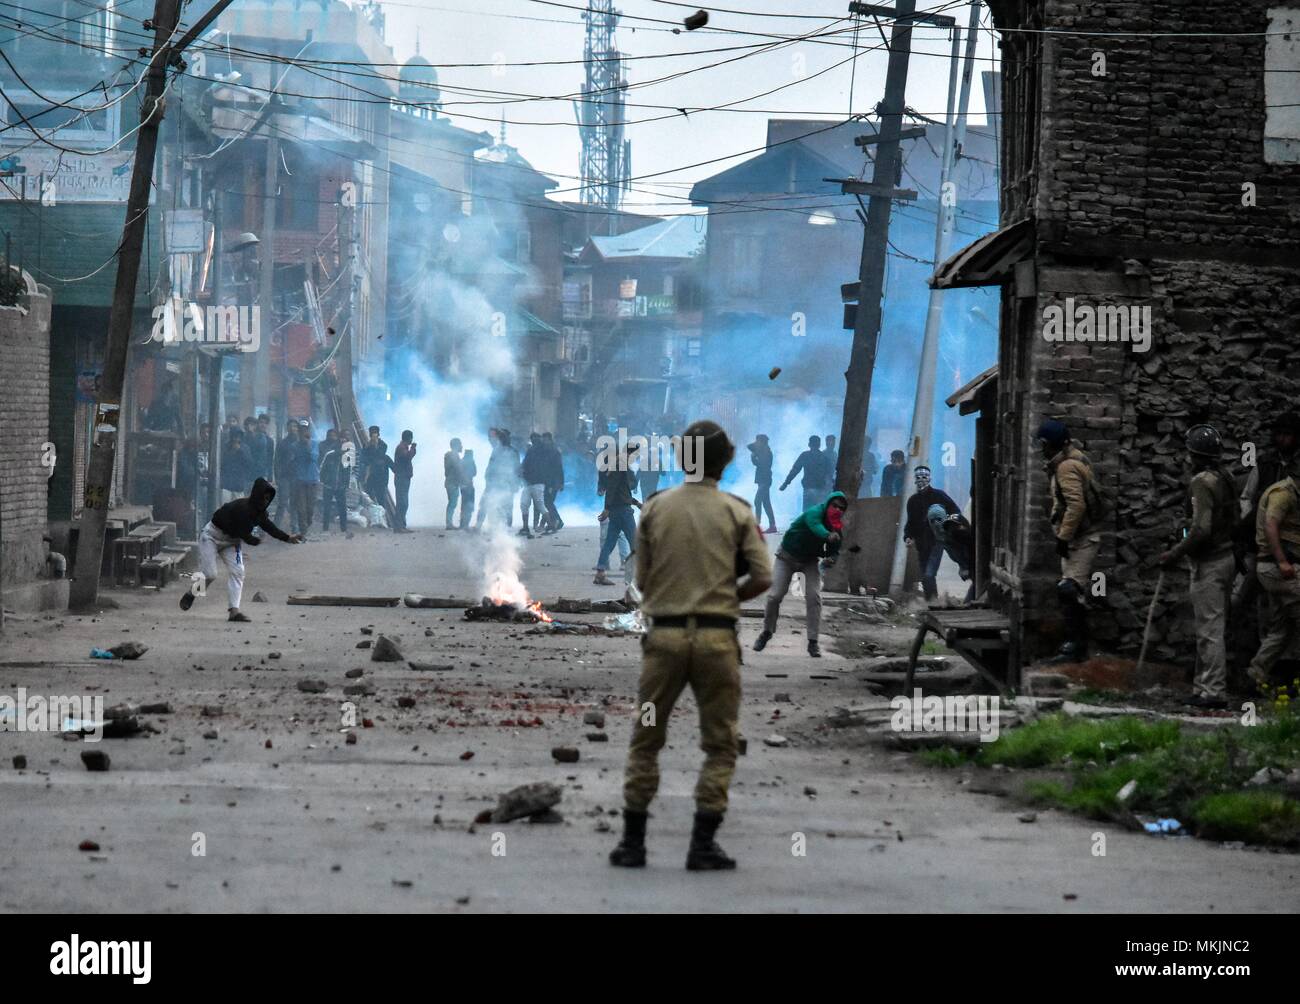 May 8, 2018 - Srinagar, J&K, India - Kashmiri protesters throw stones towards Indian policeman during clashes in Srinagar, Indian administered Kashmir. Fierce clashes broke out between government forces and Kashmiri protesters in Srinagar on Tuesday as the valley continued to remain tense over the killing of 11 people including 5 militants and 6 civilians in Indian administered Kashmir. Police used tear smoke shells and shot gun pellets to disperse hundreds of demonstrators who hurled rocks and chanted anti-Indian and pro-freedom slogans. (Credit Image: © Saqib Majeed/SOPA Images via ZUMA Wire Stock Photo